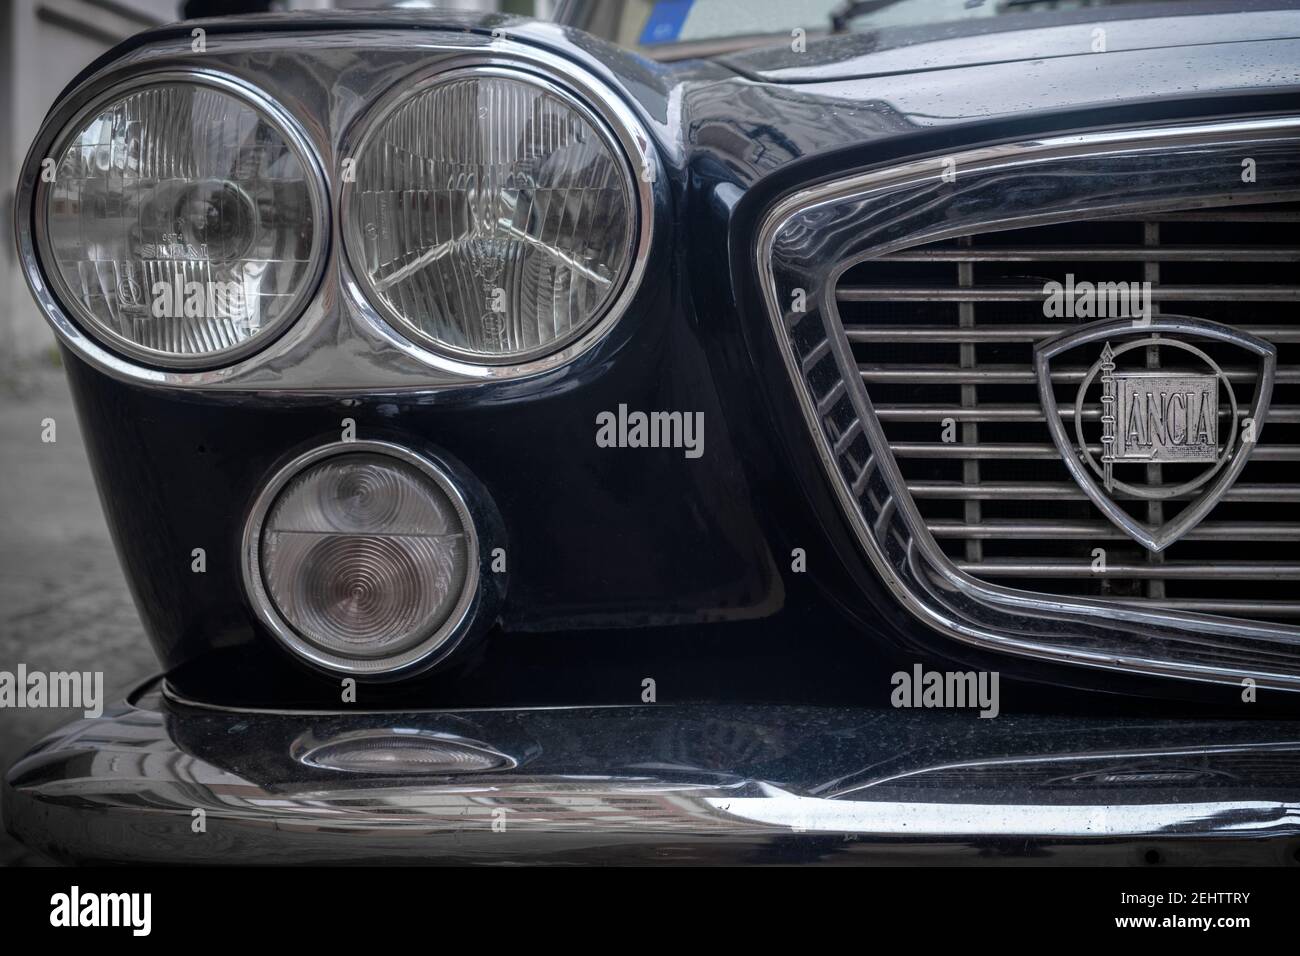 Lancia Flavia Coupe 1966 vintage model radiator grille with emblem lights and bumper detailed view Stock Photo